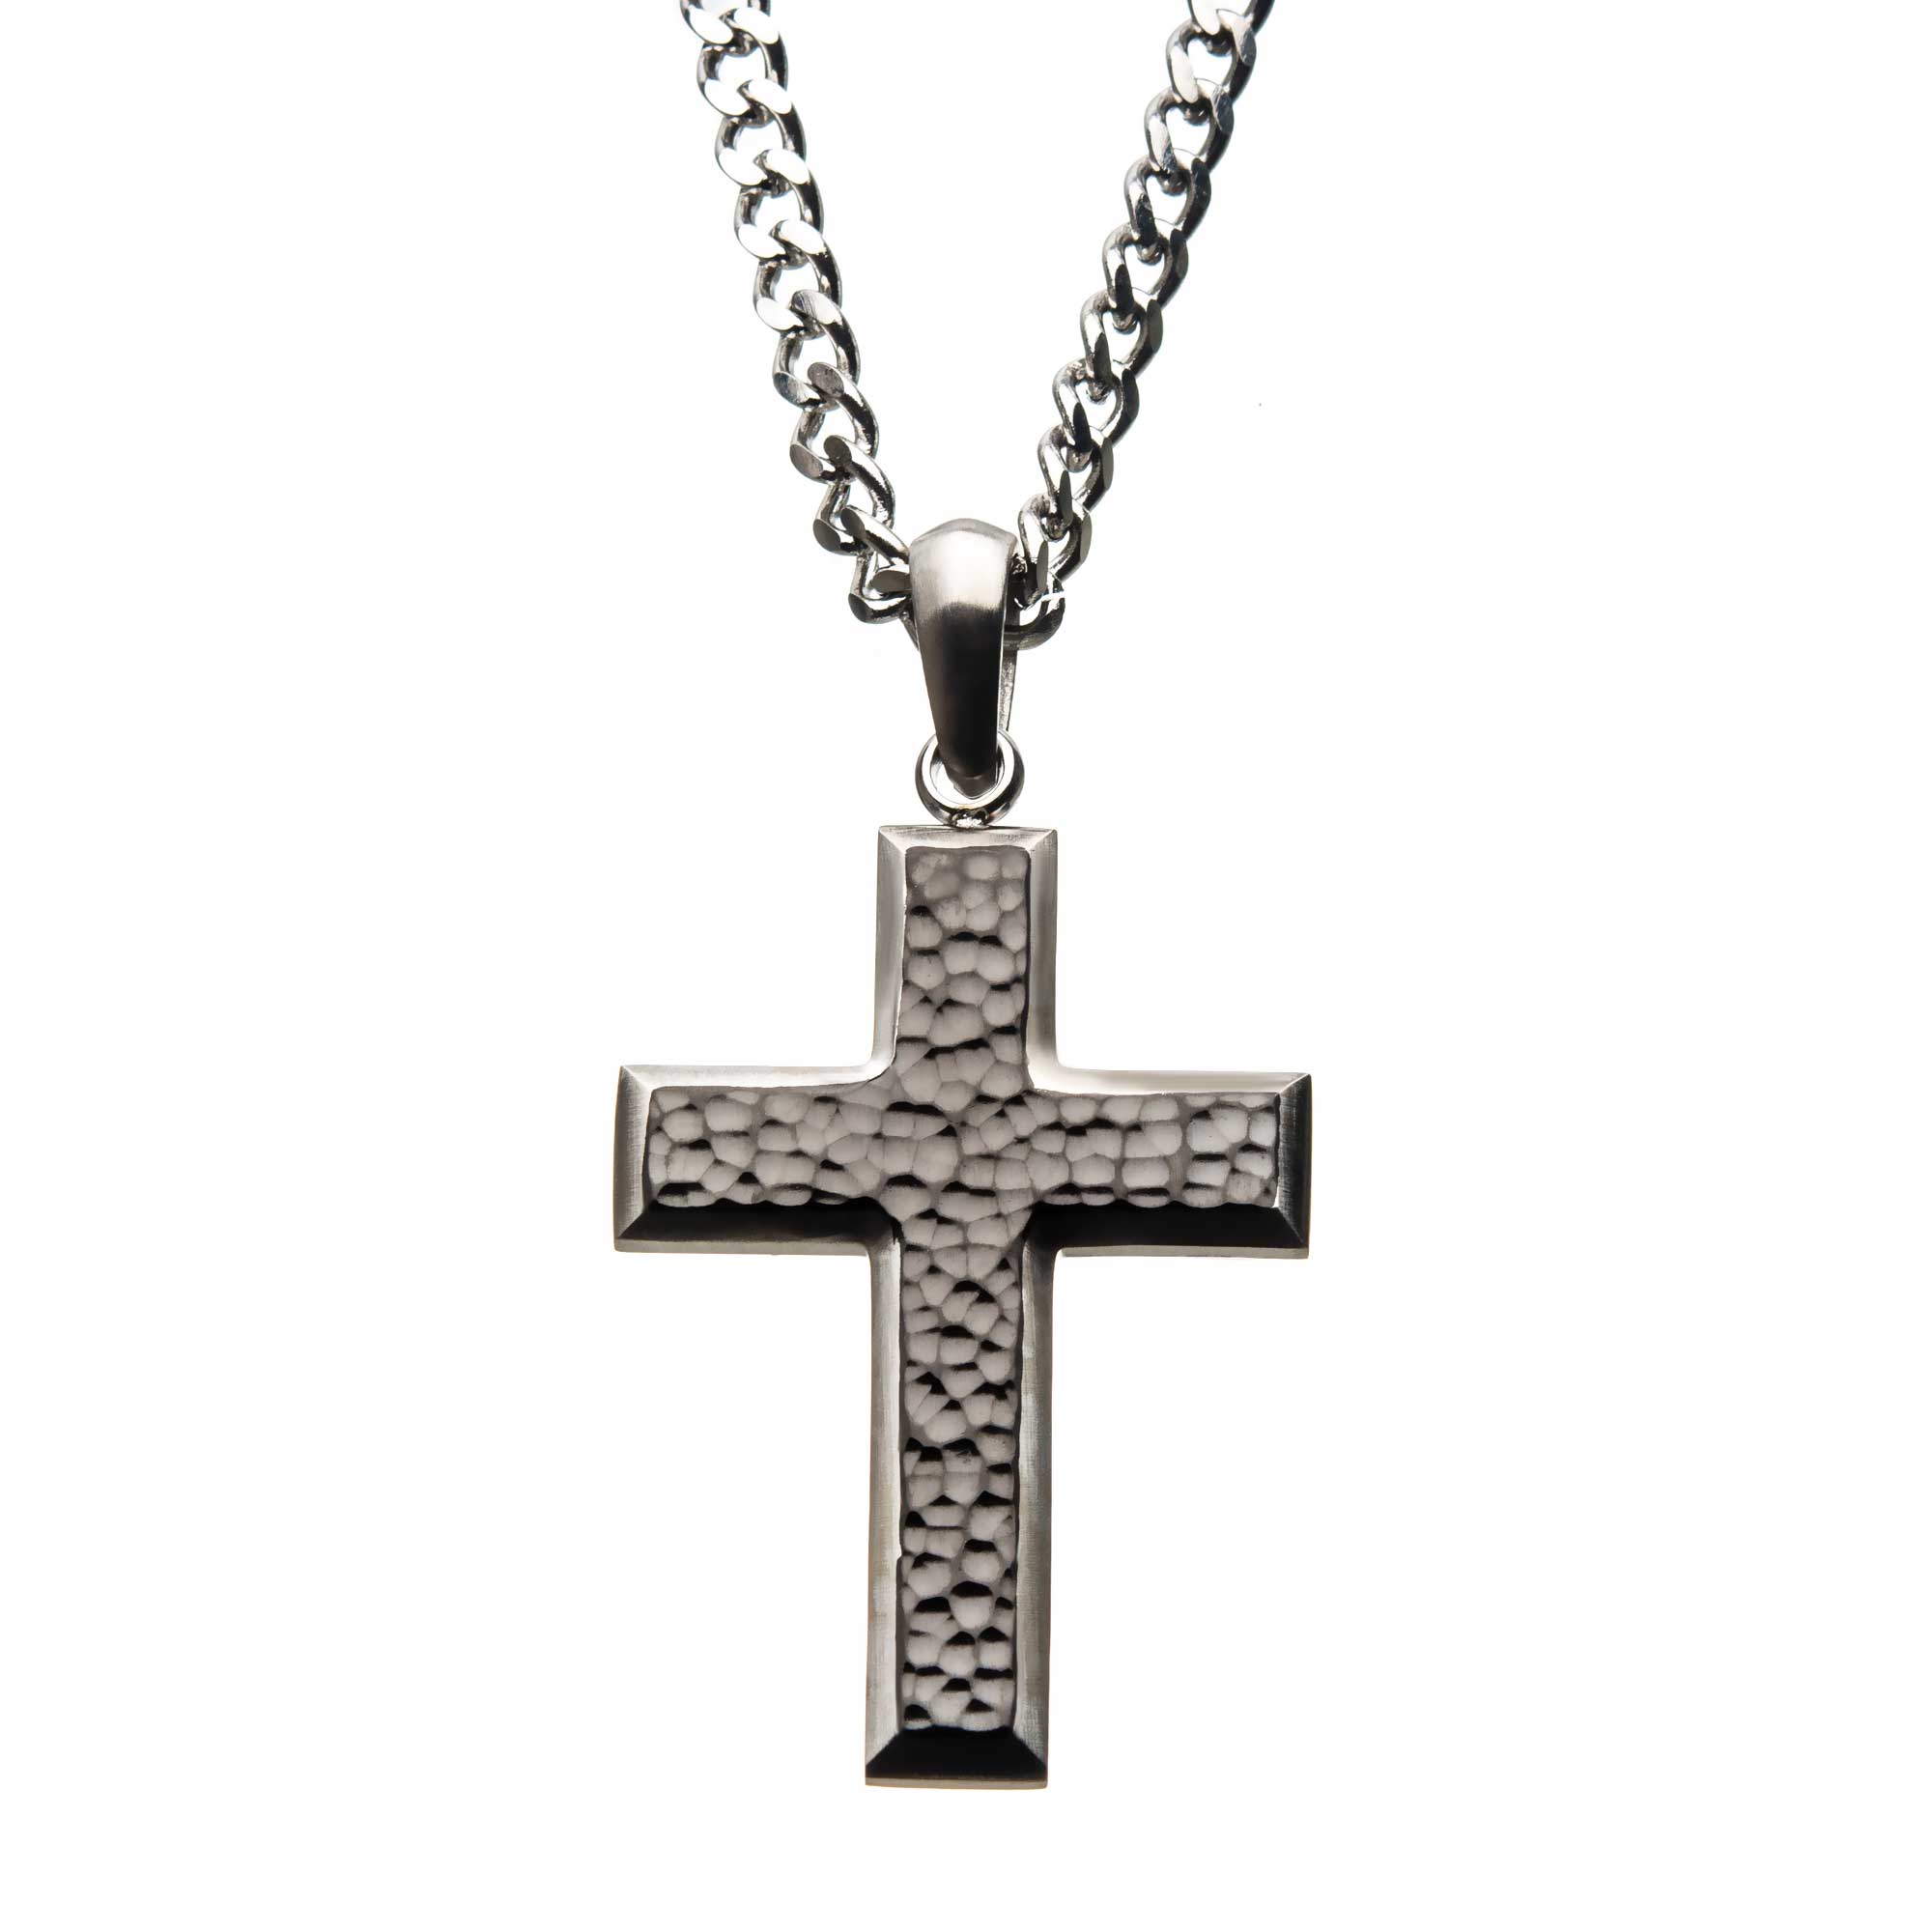 Stainless Steel Hammered Cross Pendant with Chain Morin Jewelers Southbridge, MA